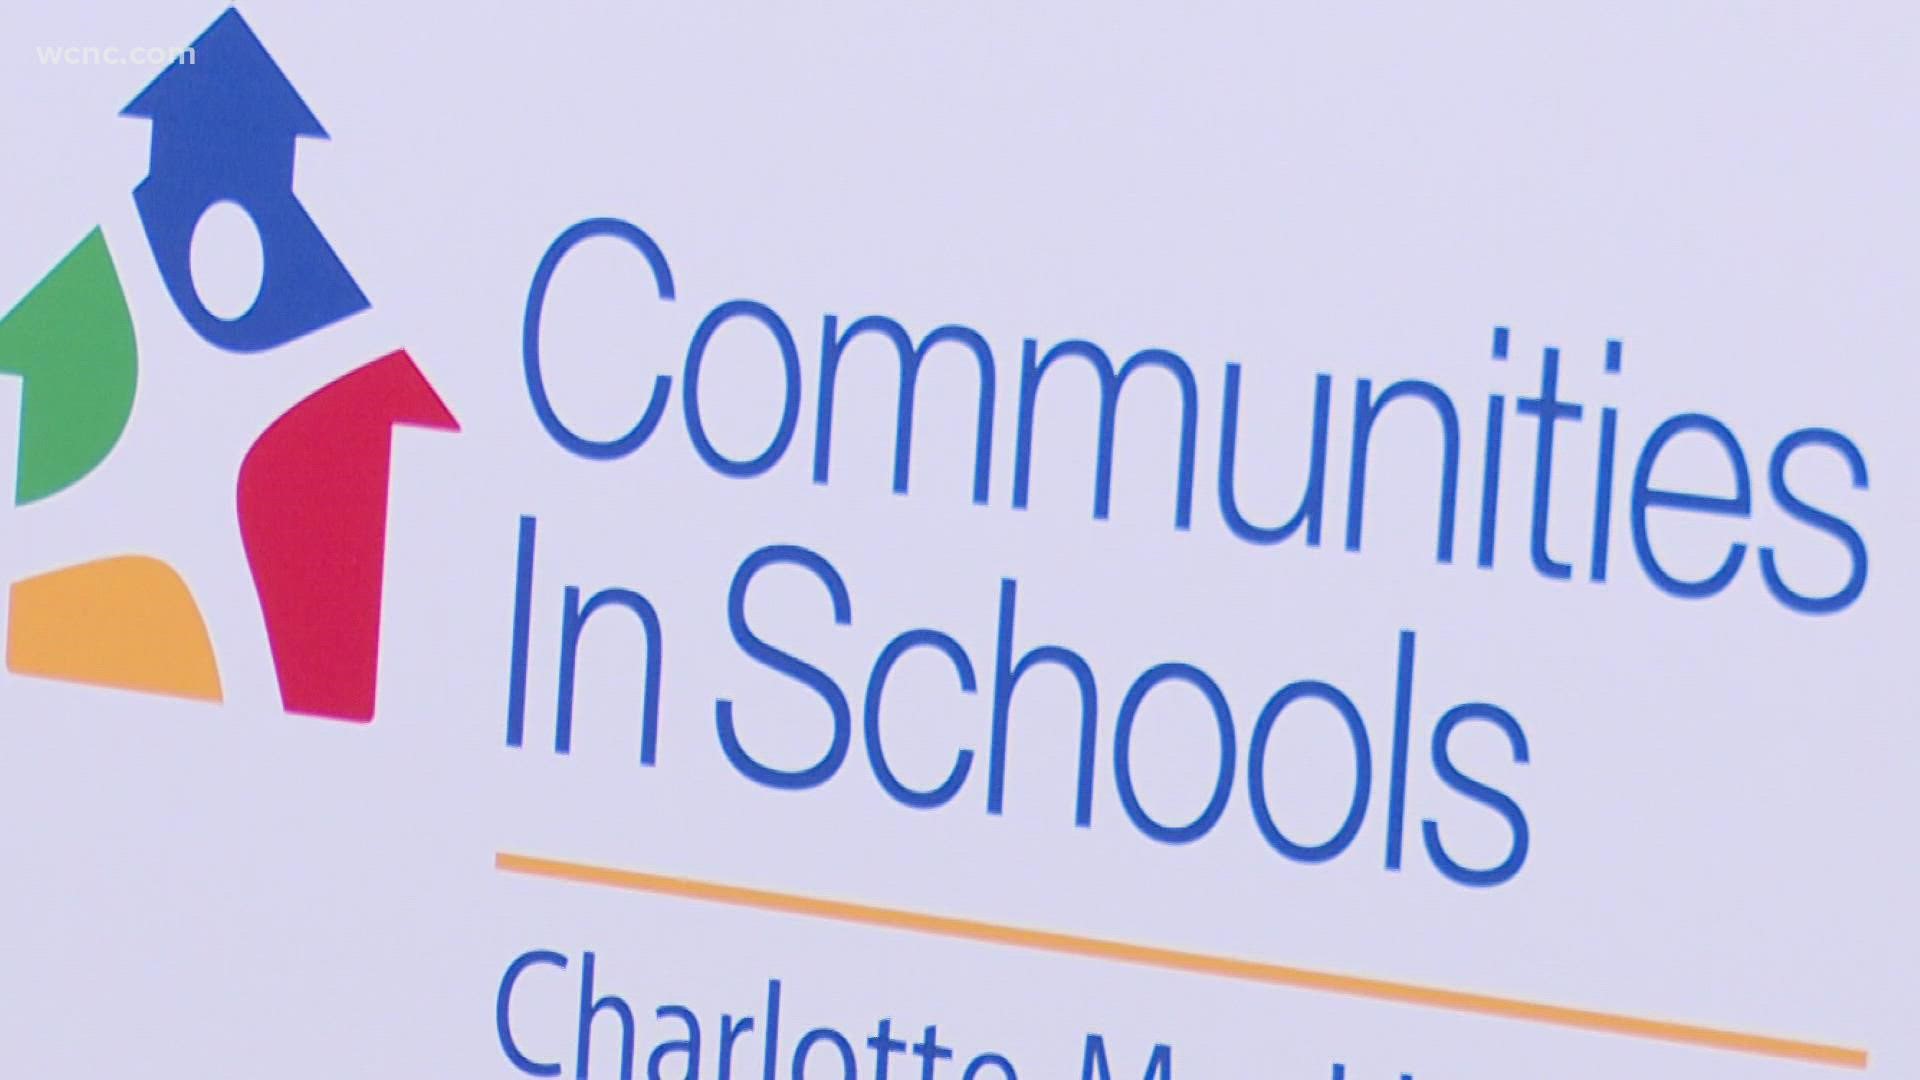 Communities In Schools of Charlotte-Mecklenburg is getting $5 million to help fight inequality in education.